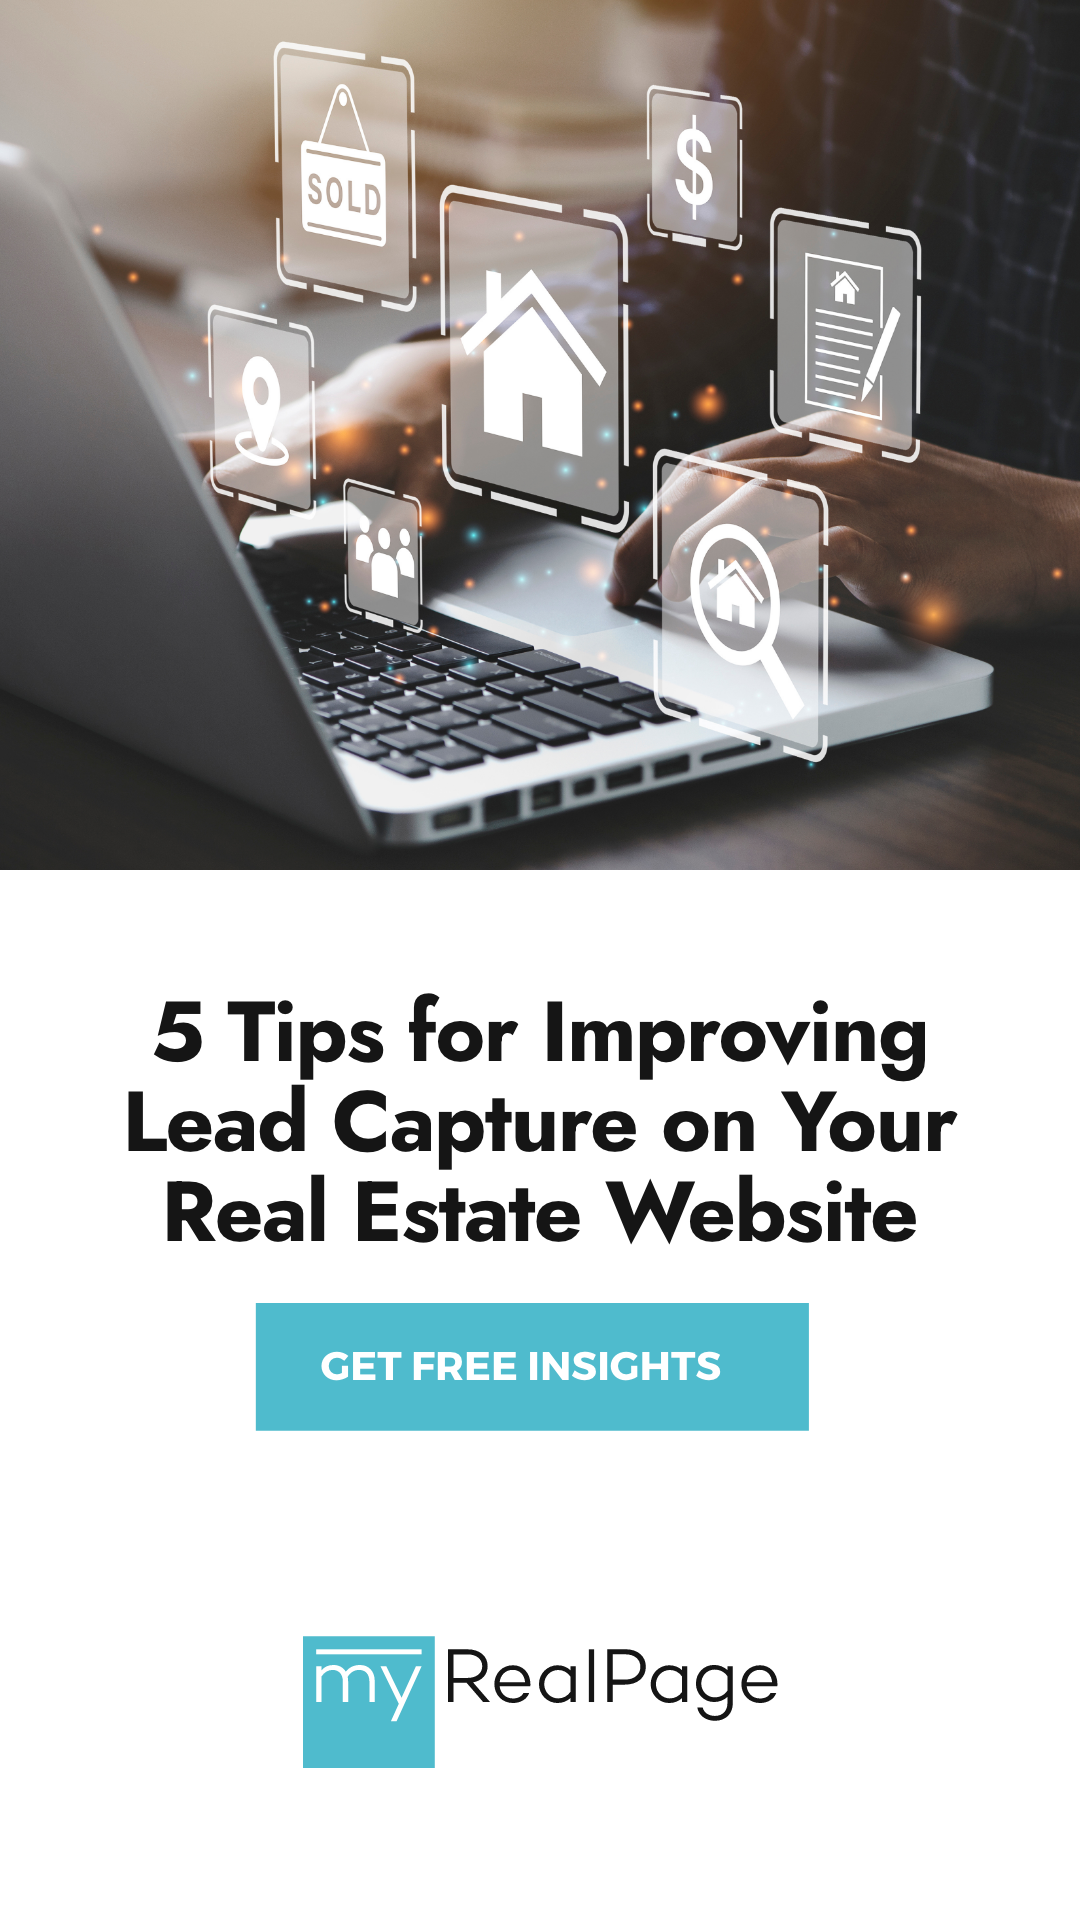 5 tips for improving lead capture on your website ebook